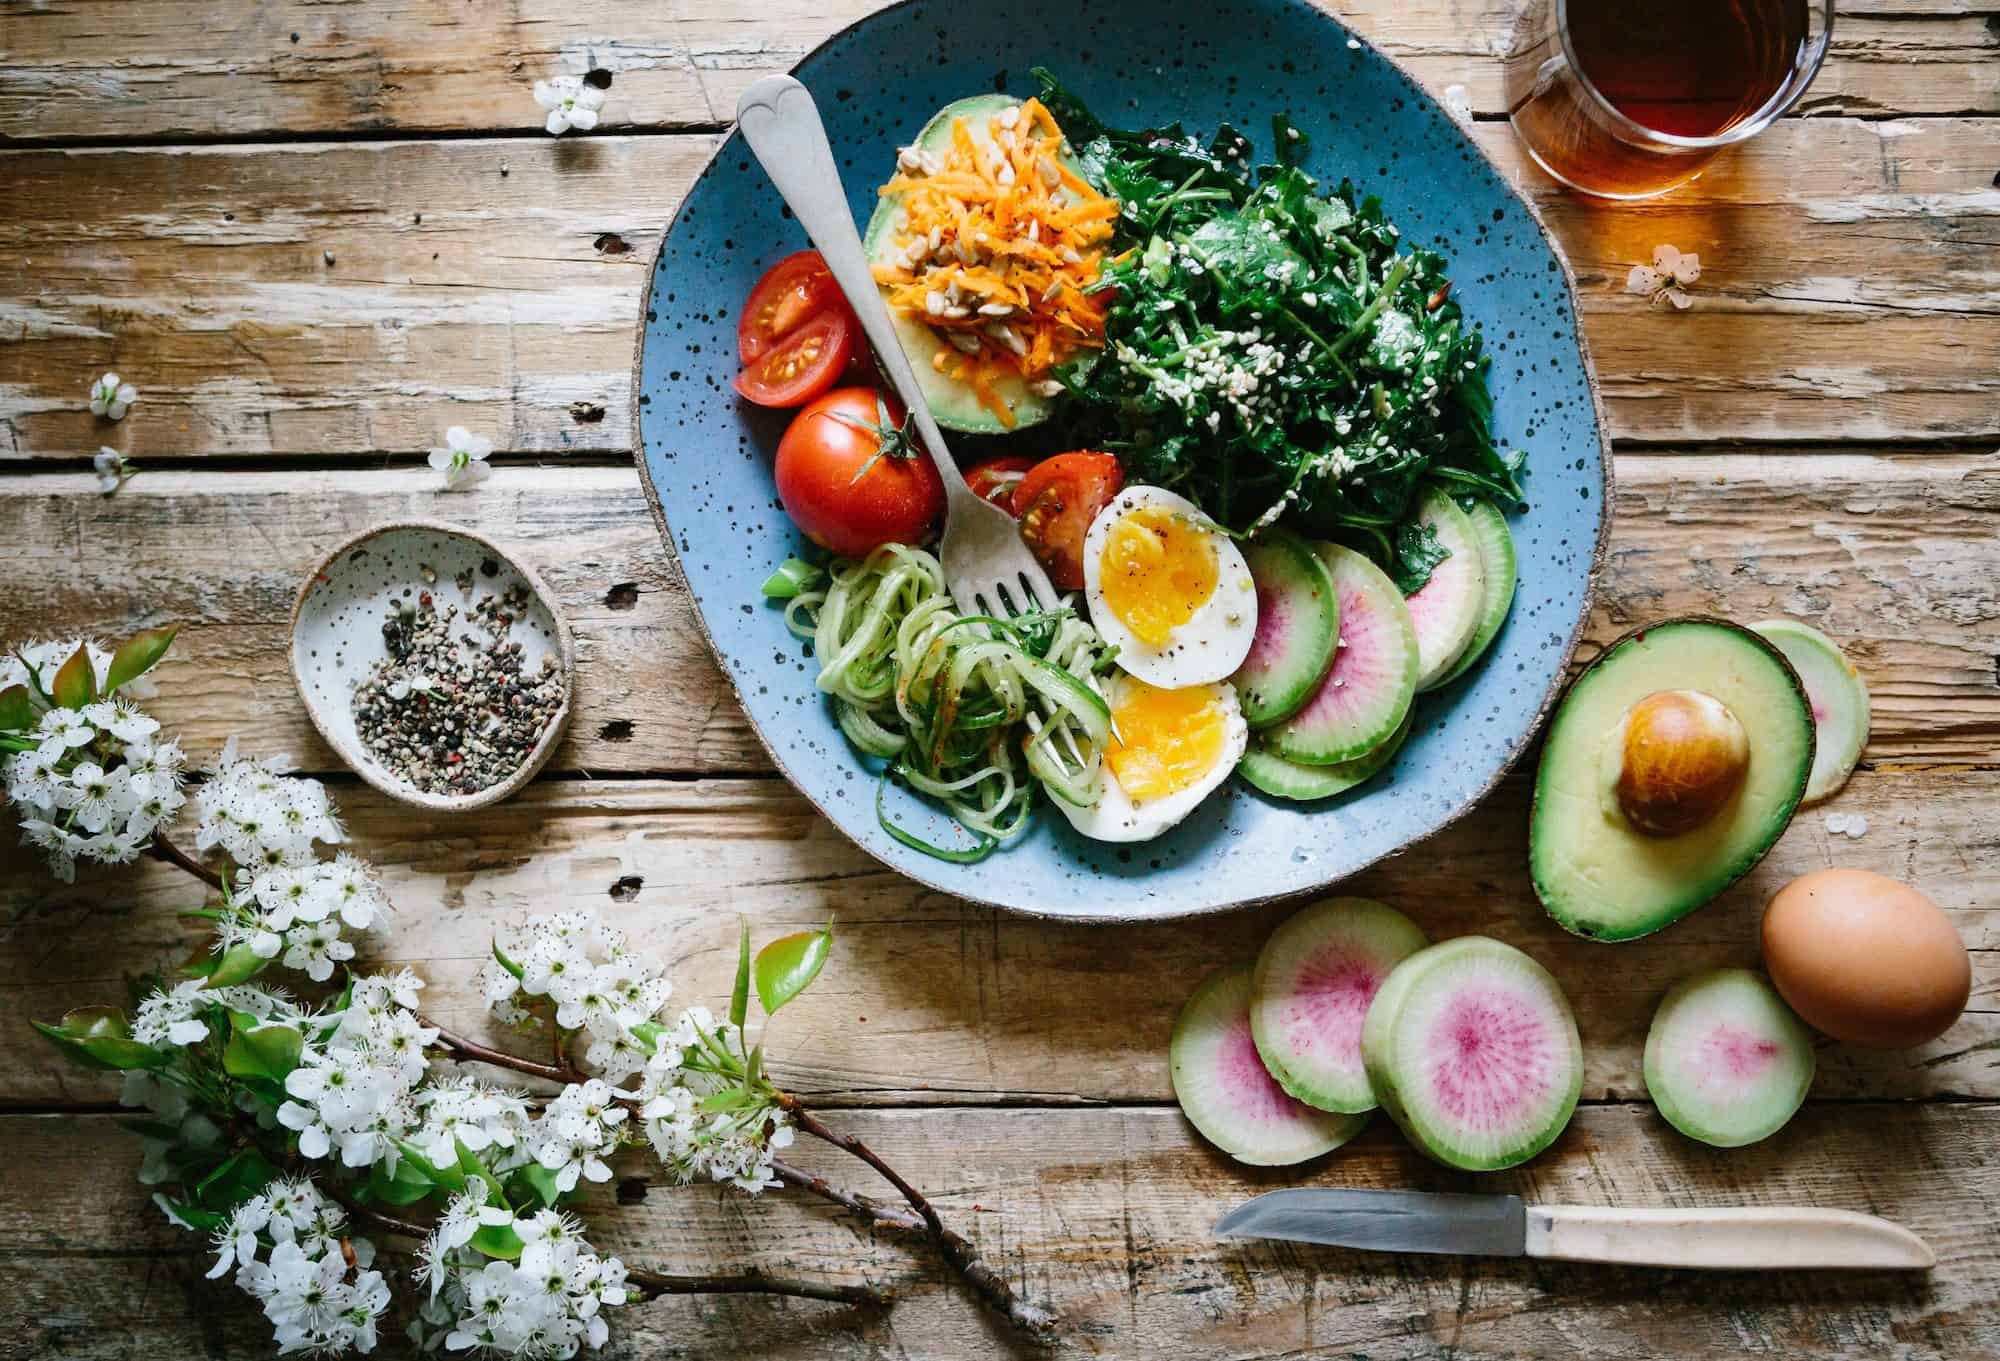 A plate of colorful gluten-free fresh salads and eggs on a wooden table